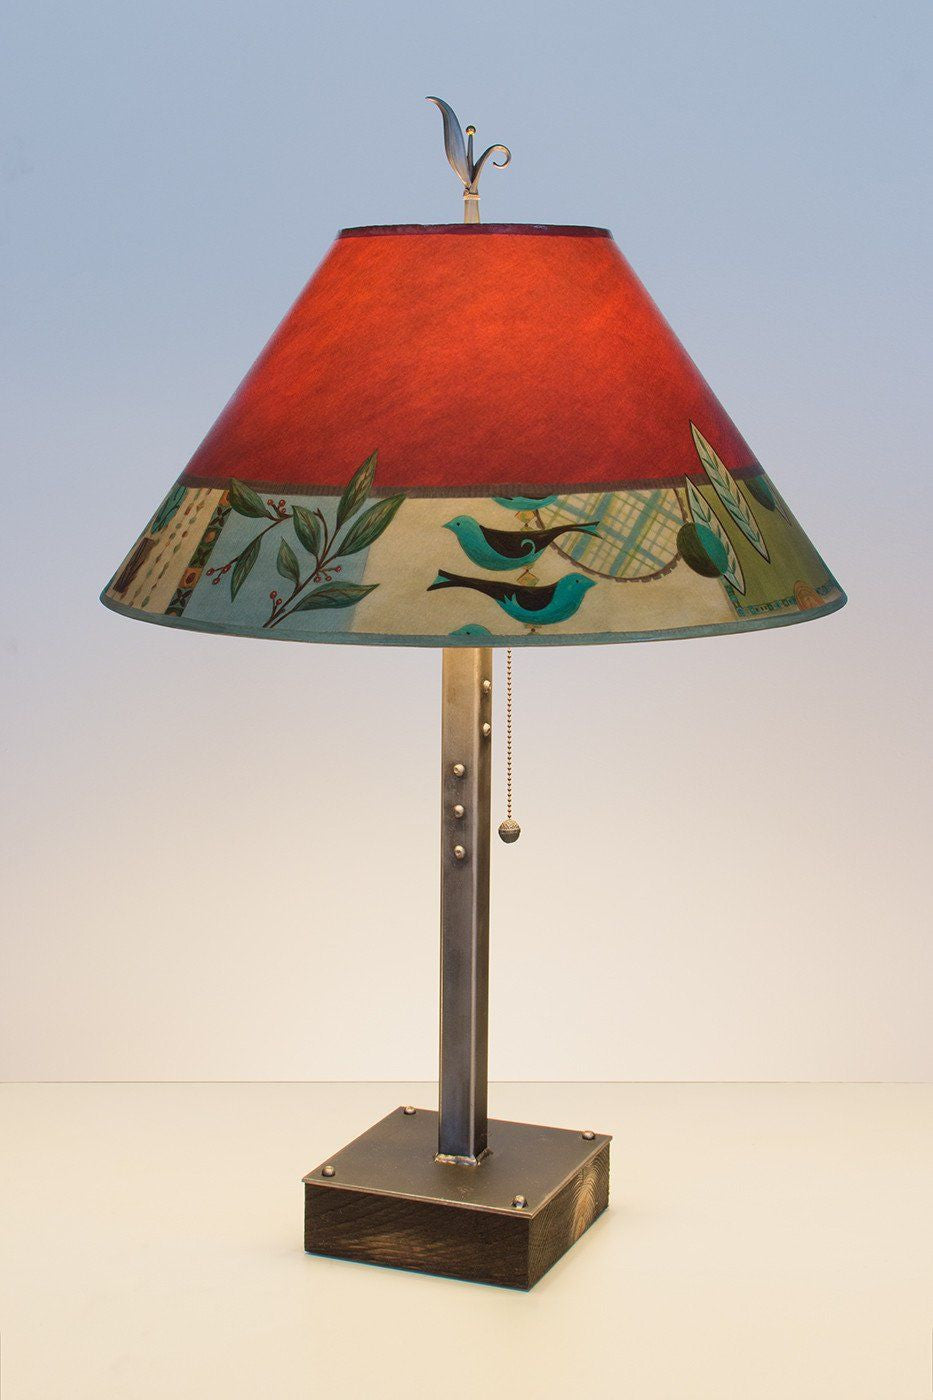 Steel Table Lamp on Wood with Large Conical Shade in New Capri